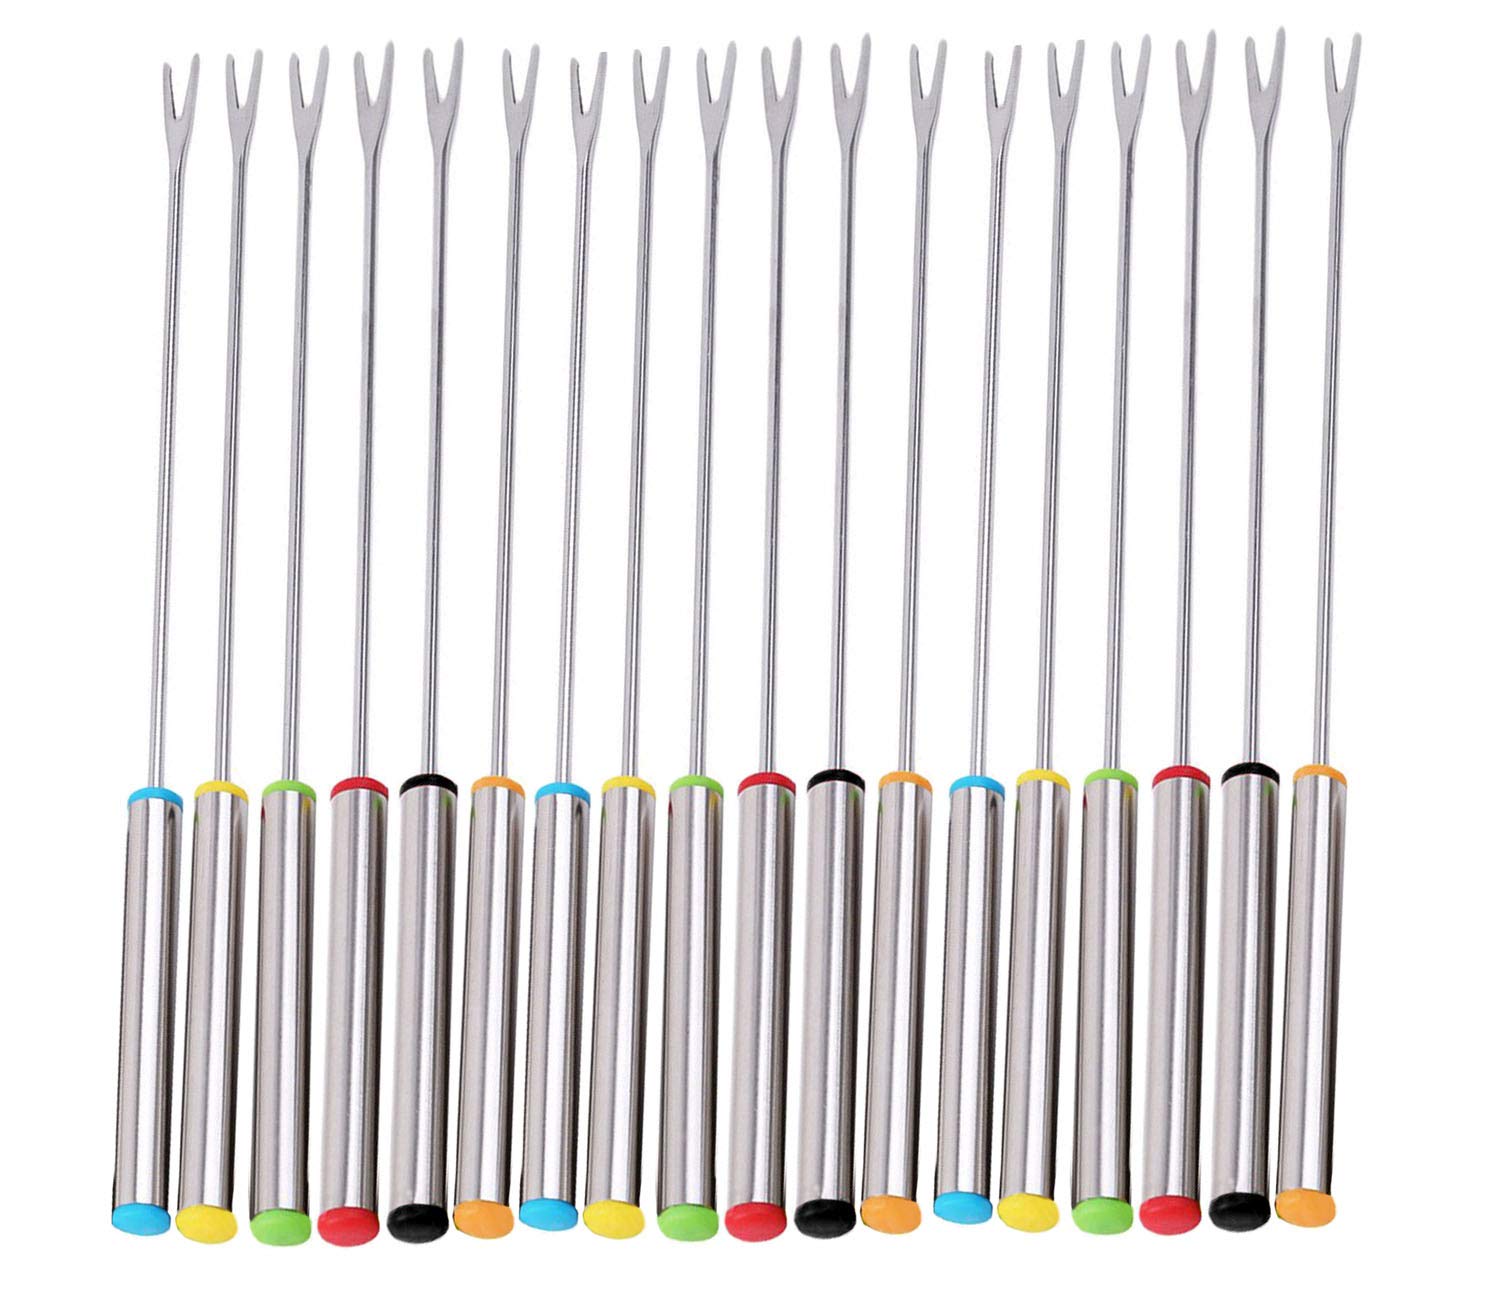 Vincilee 18 Pieces Stainless Steel Fondue Forks with Heat Resistant Handle For Cheese Chocolate Fondue Roast Marshmallows Meat Dessert Fork Fondue Melting Skewer Barbecue fork Kitchen Tools